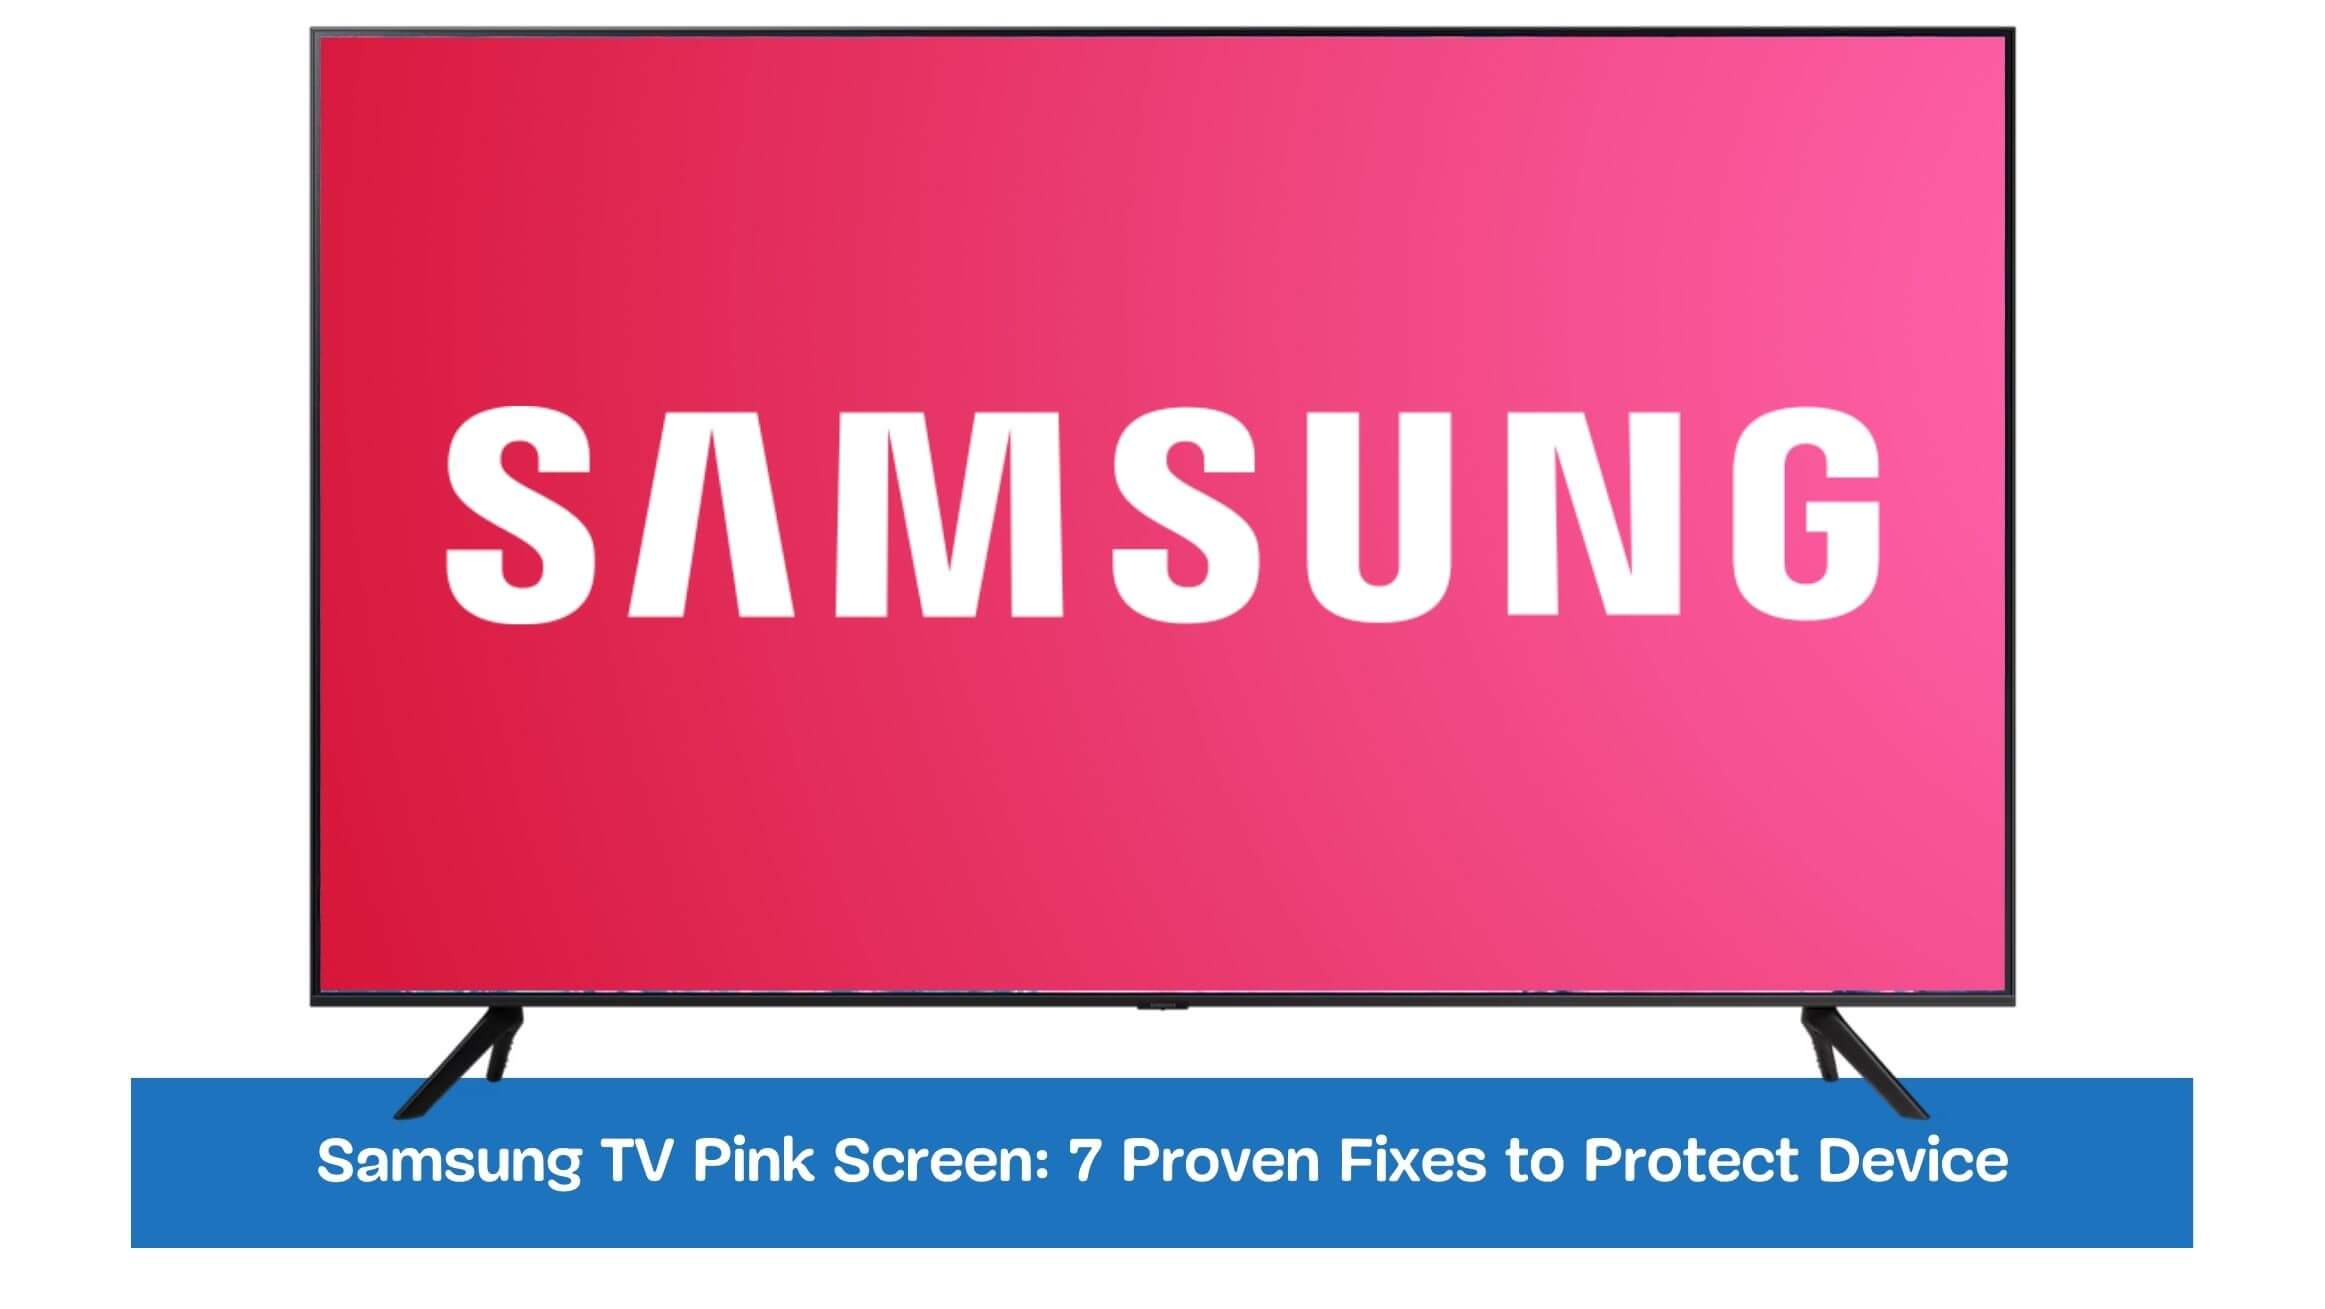 Samsung TV Pink Screen: 7 Proven Fixes to Protect Device